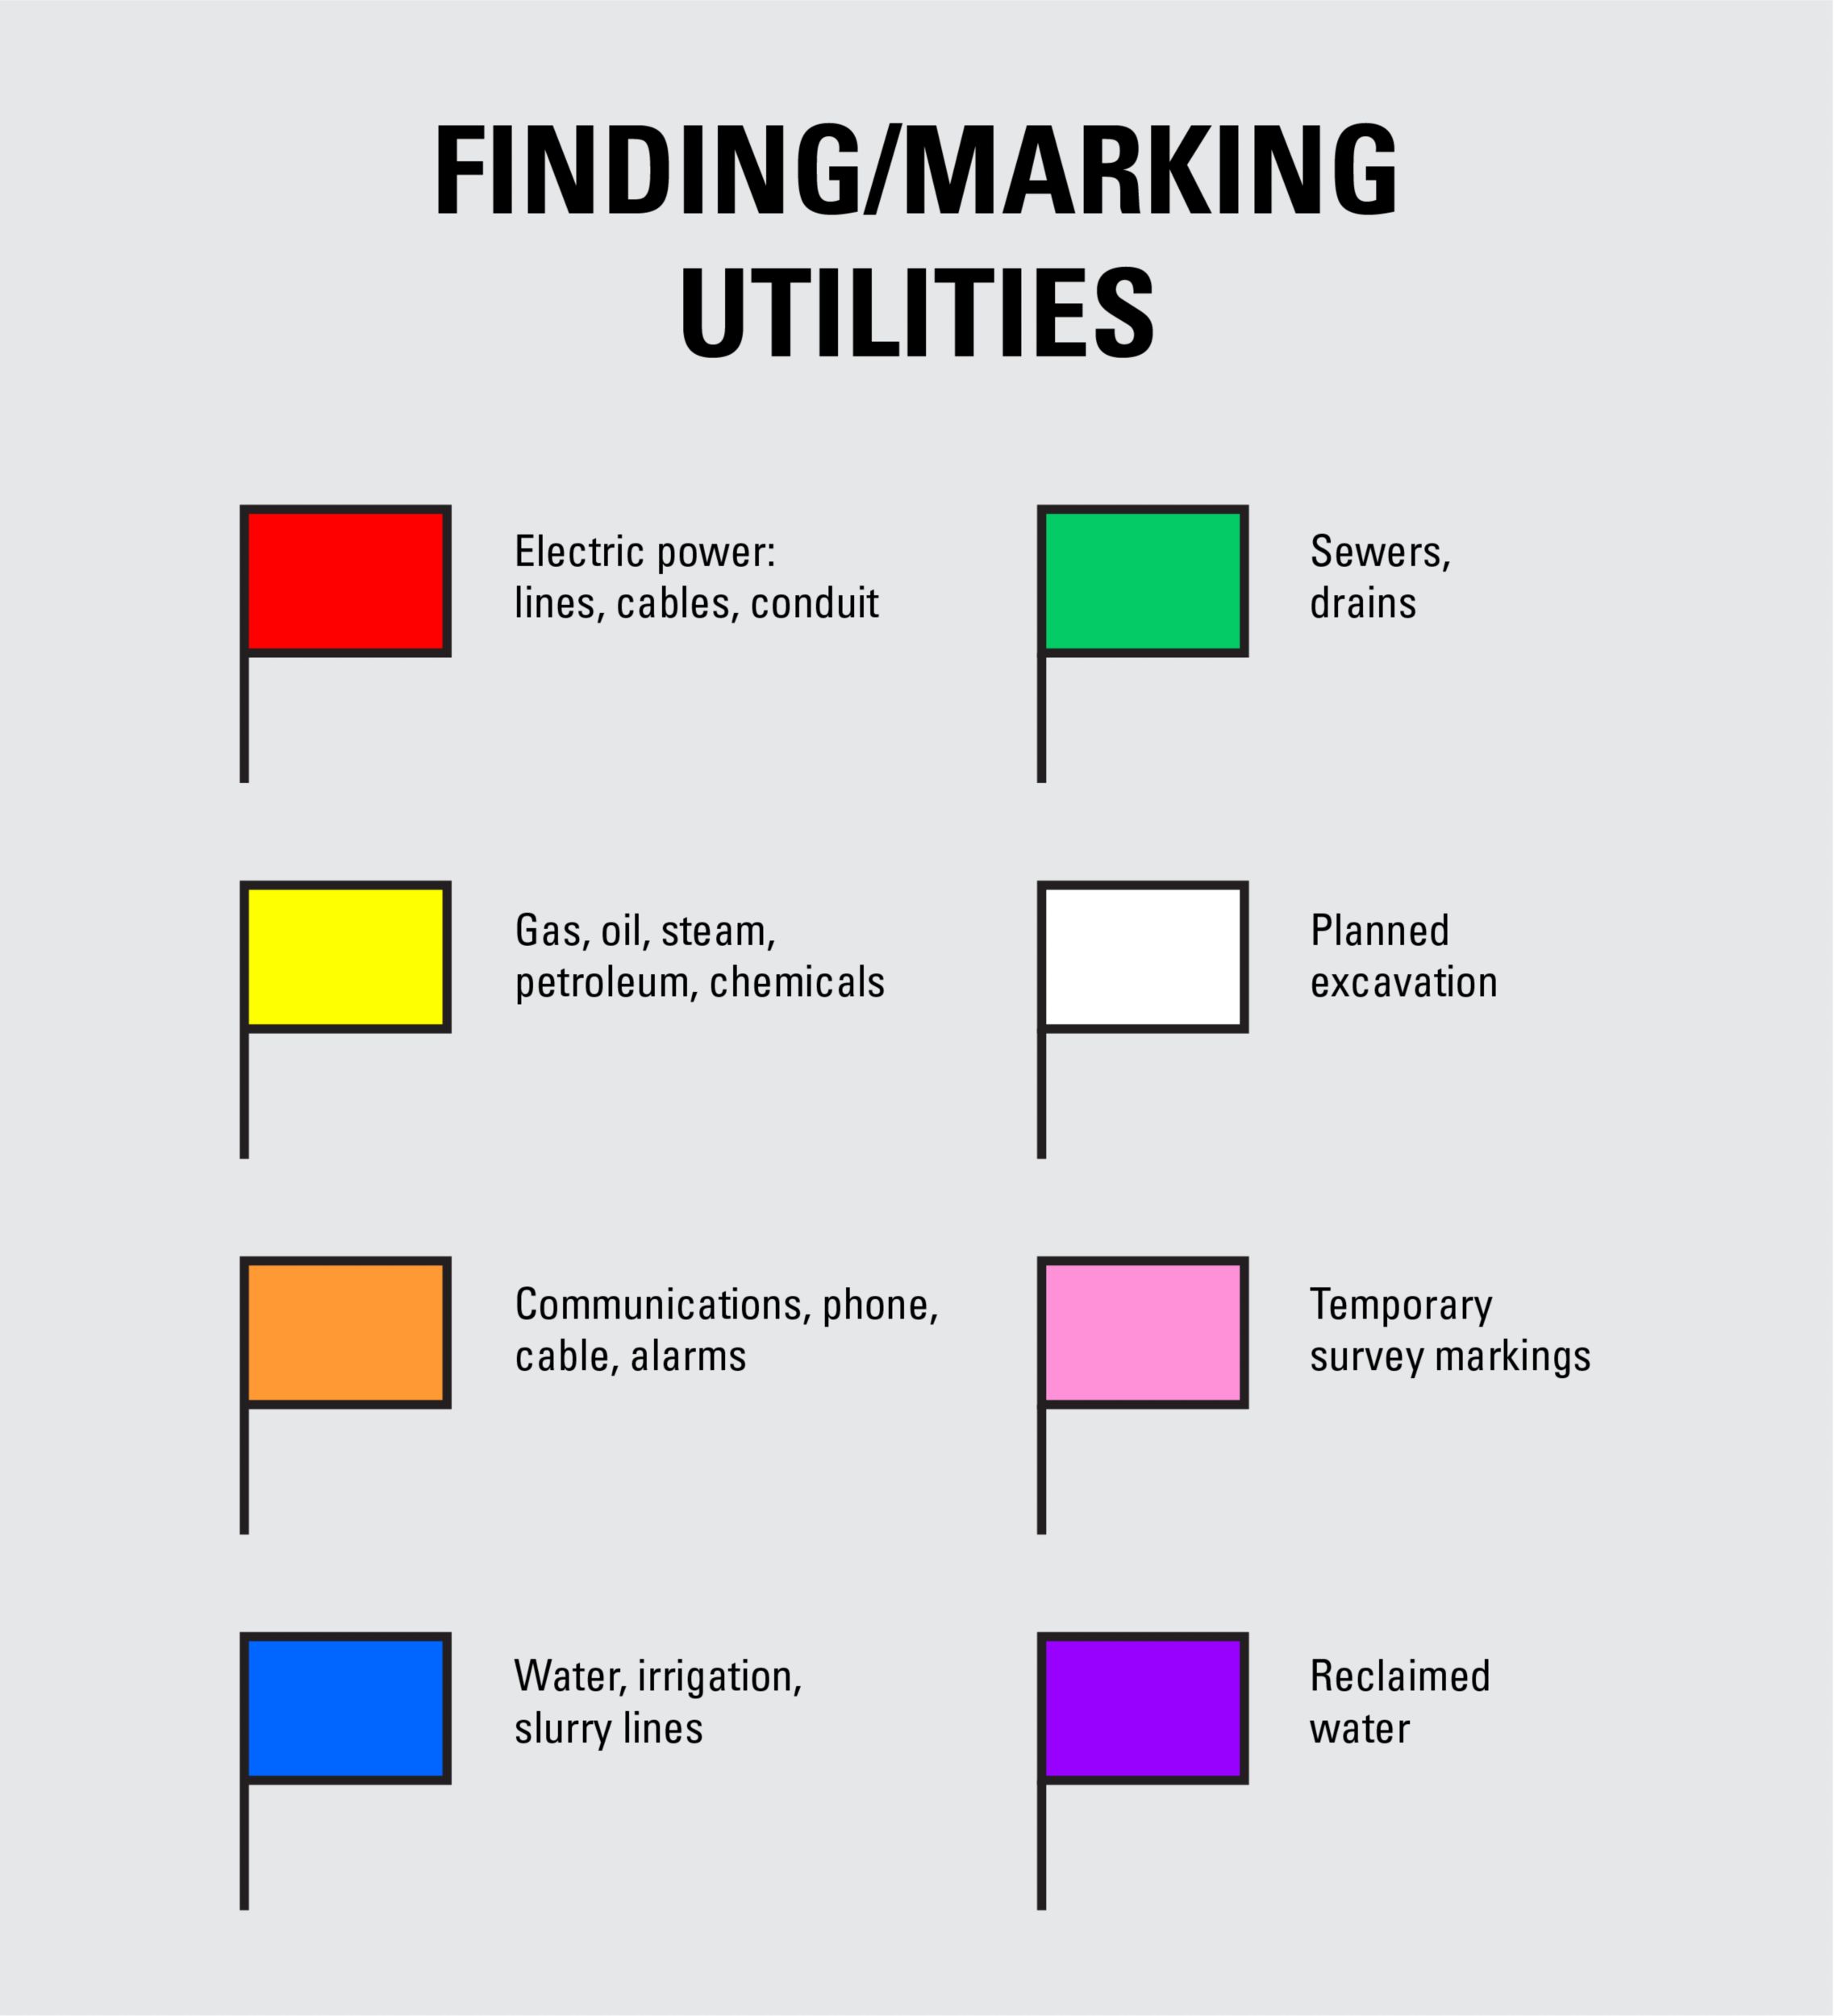 FINDING AND MARKING UTILITIES